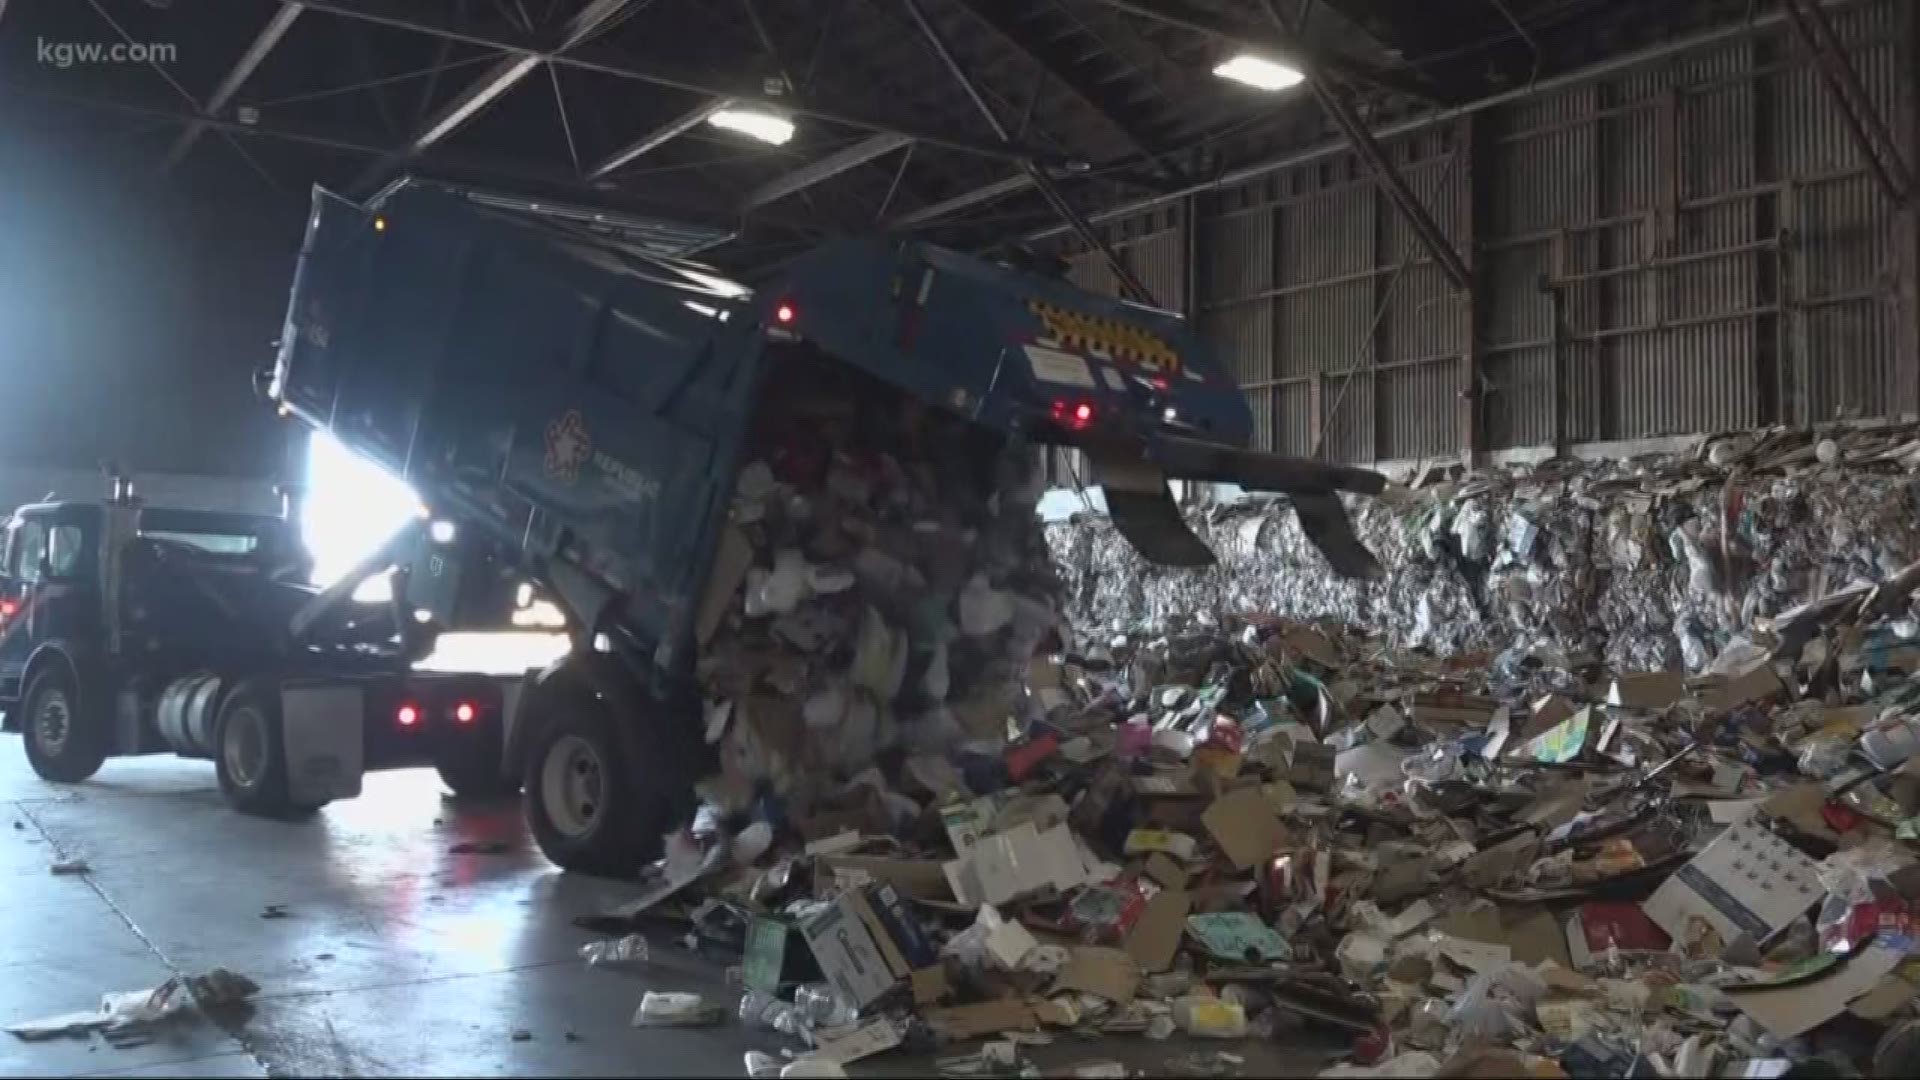 Marion County plans to fine residents for improper recycling.